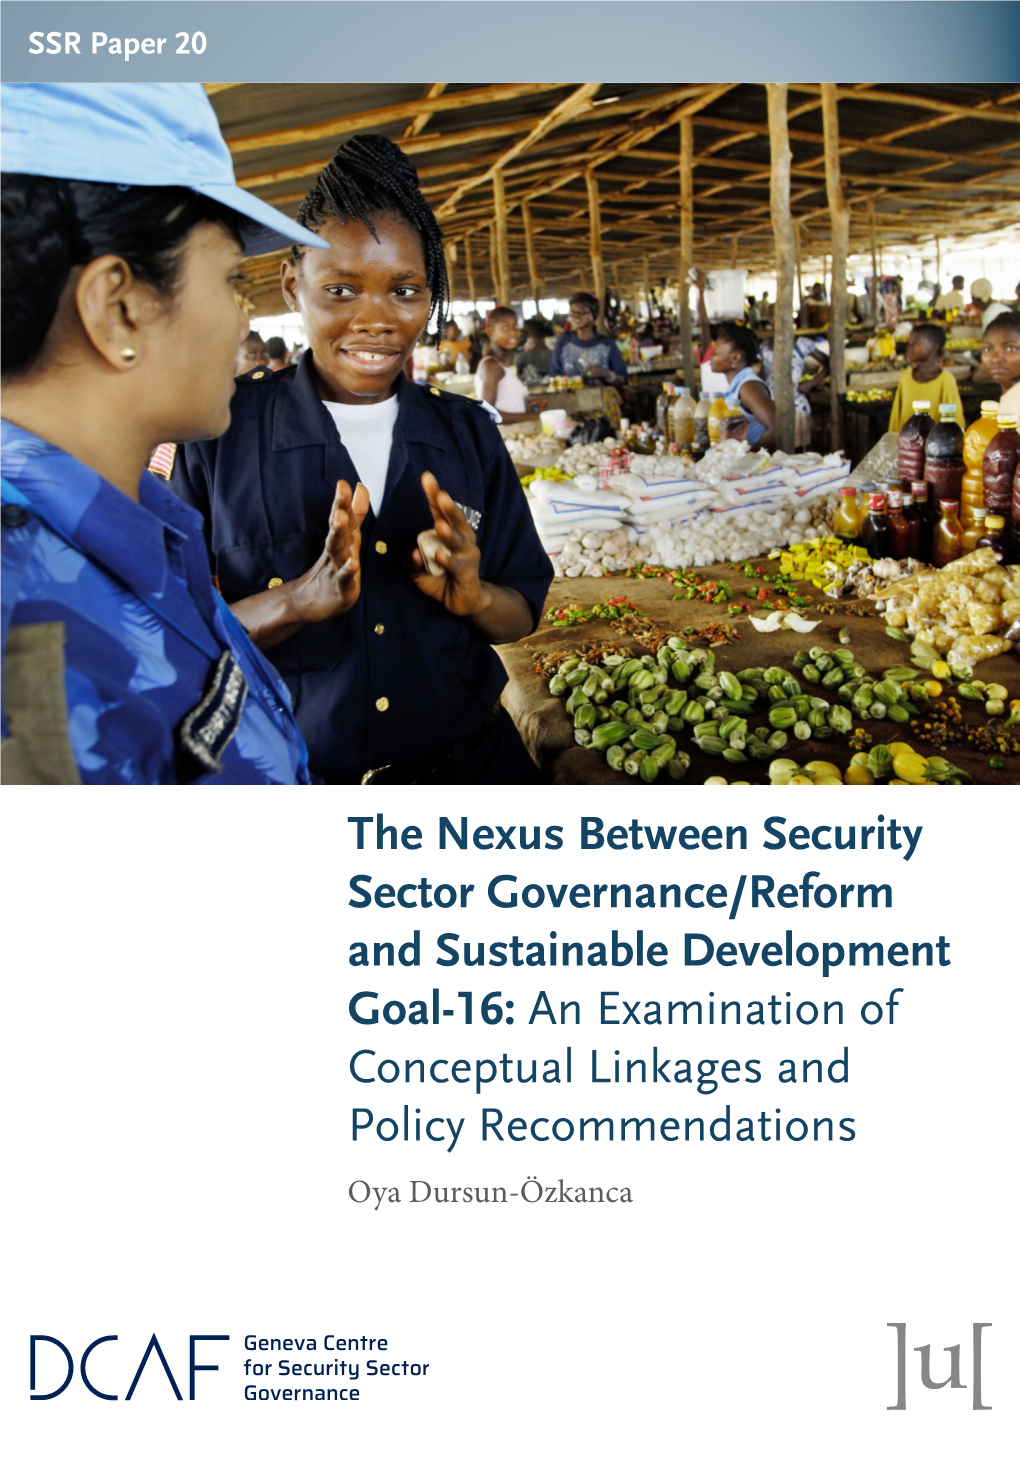 The Nexus Between Security Sector Governance/Reform and Sustainable Development Goal-16: an Examination of Conceptual Linkages and Policy Recommendations